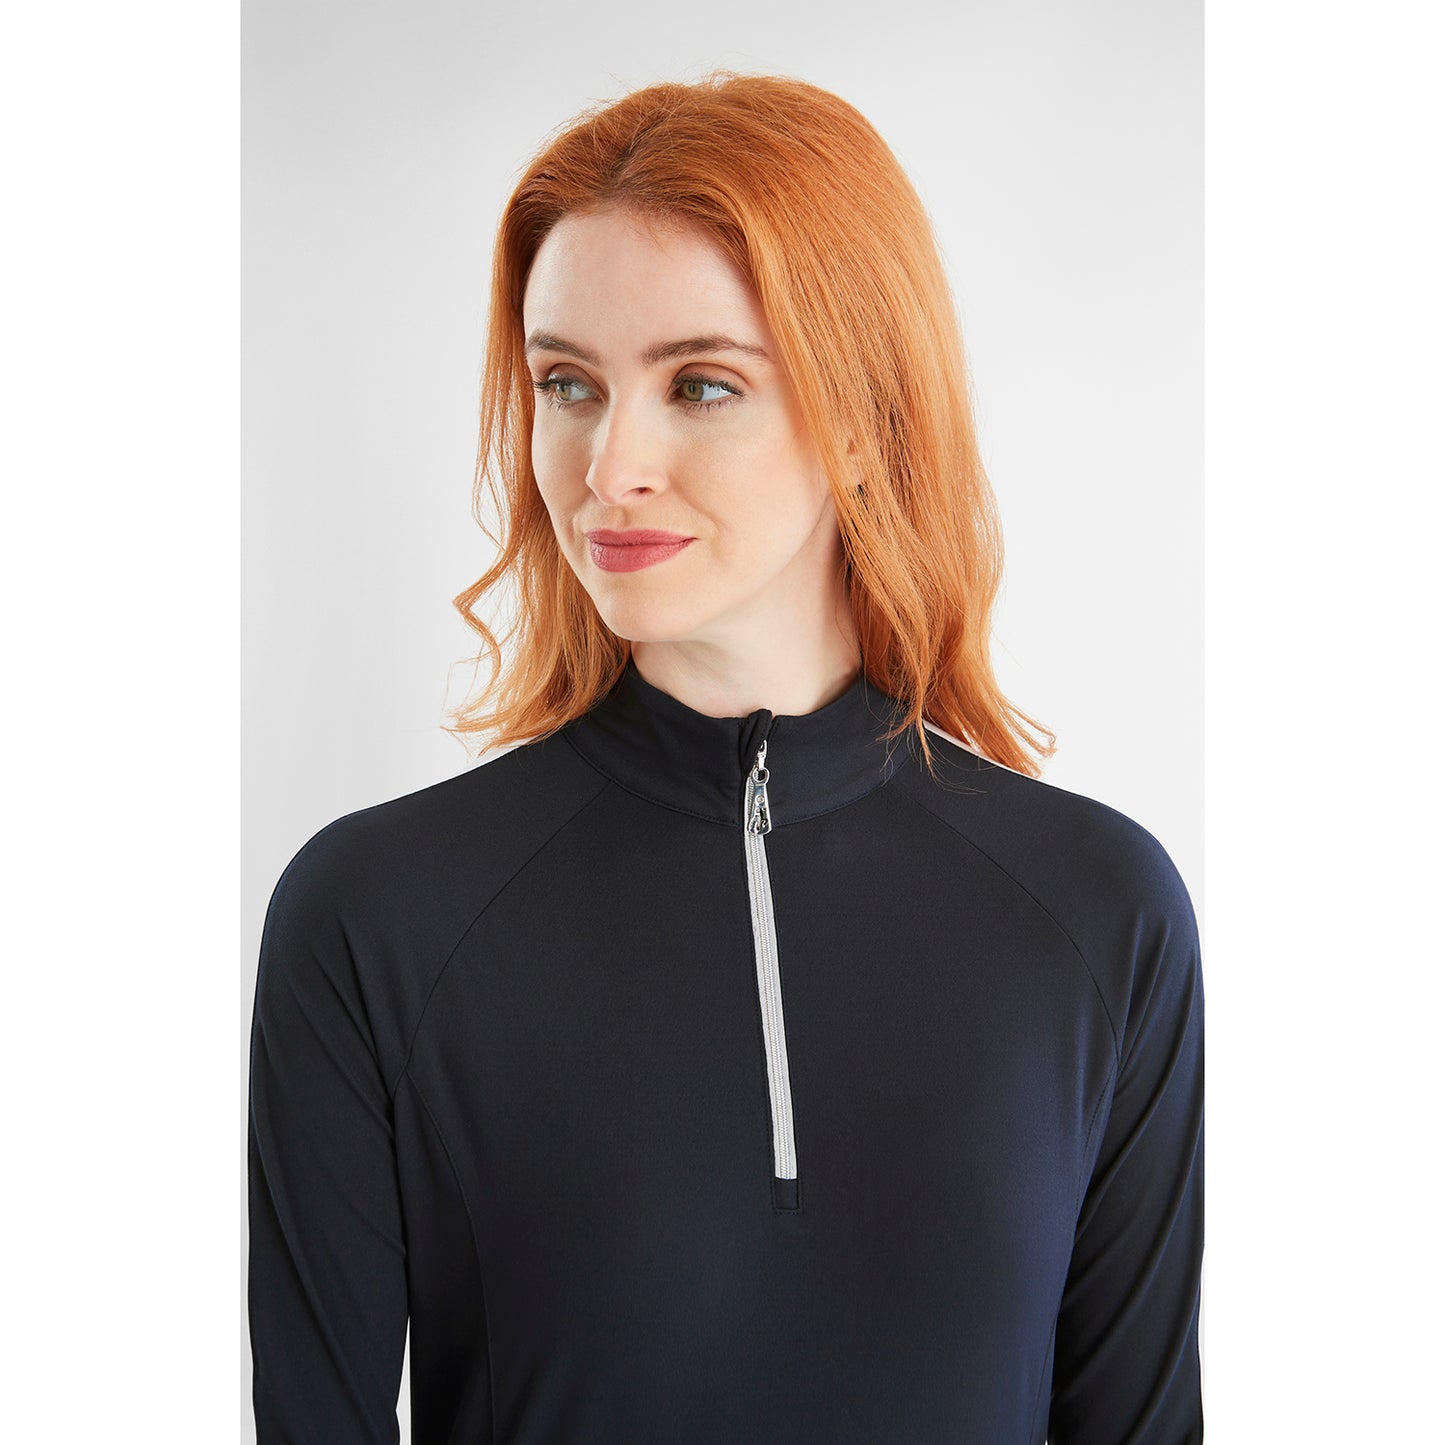 Green Lamb Ladies 1/4 Zip Neck Top with Contrast Stripes in Black/White